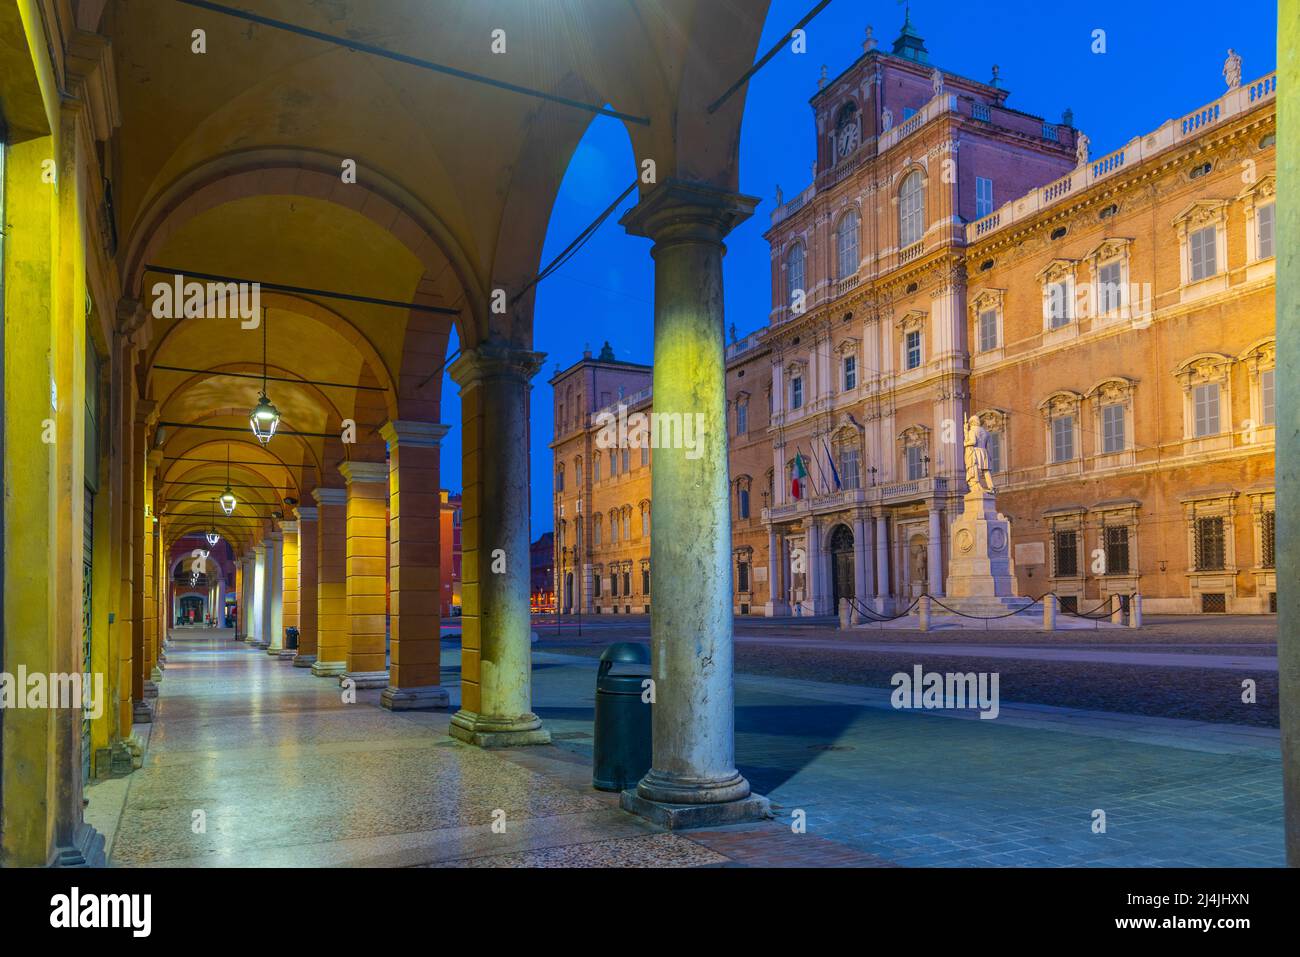 Sunrise view of Palazzo Ducale through an arcade in Italian town Modena. Stock Photo